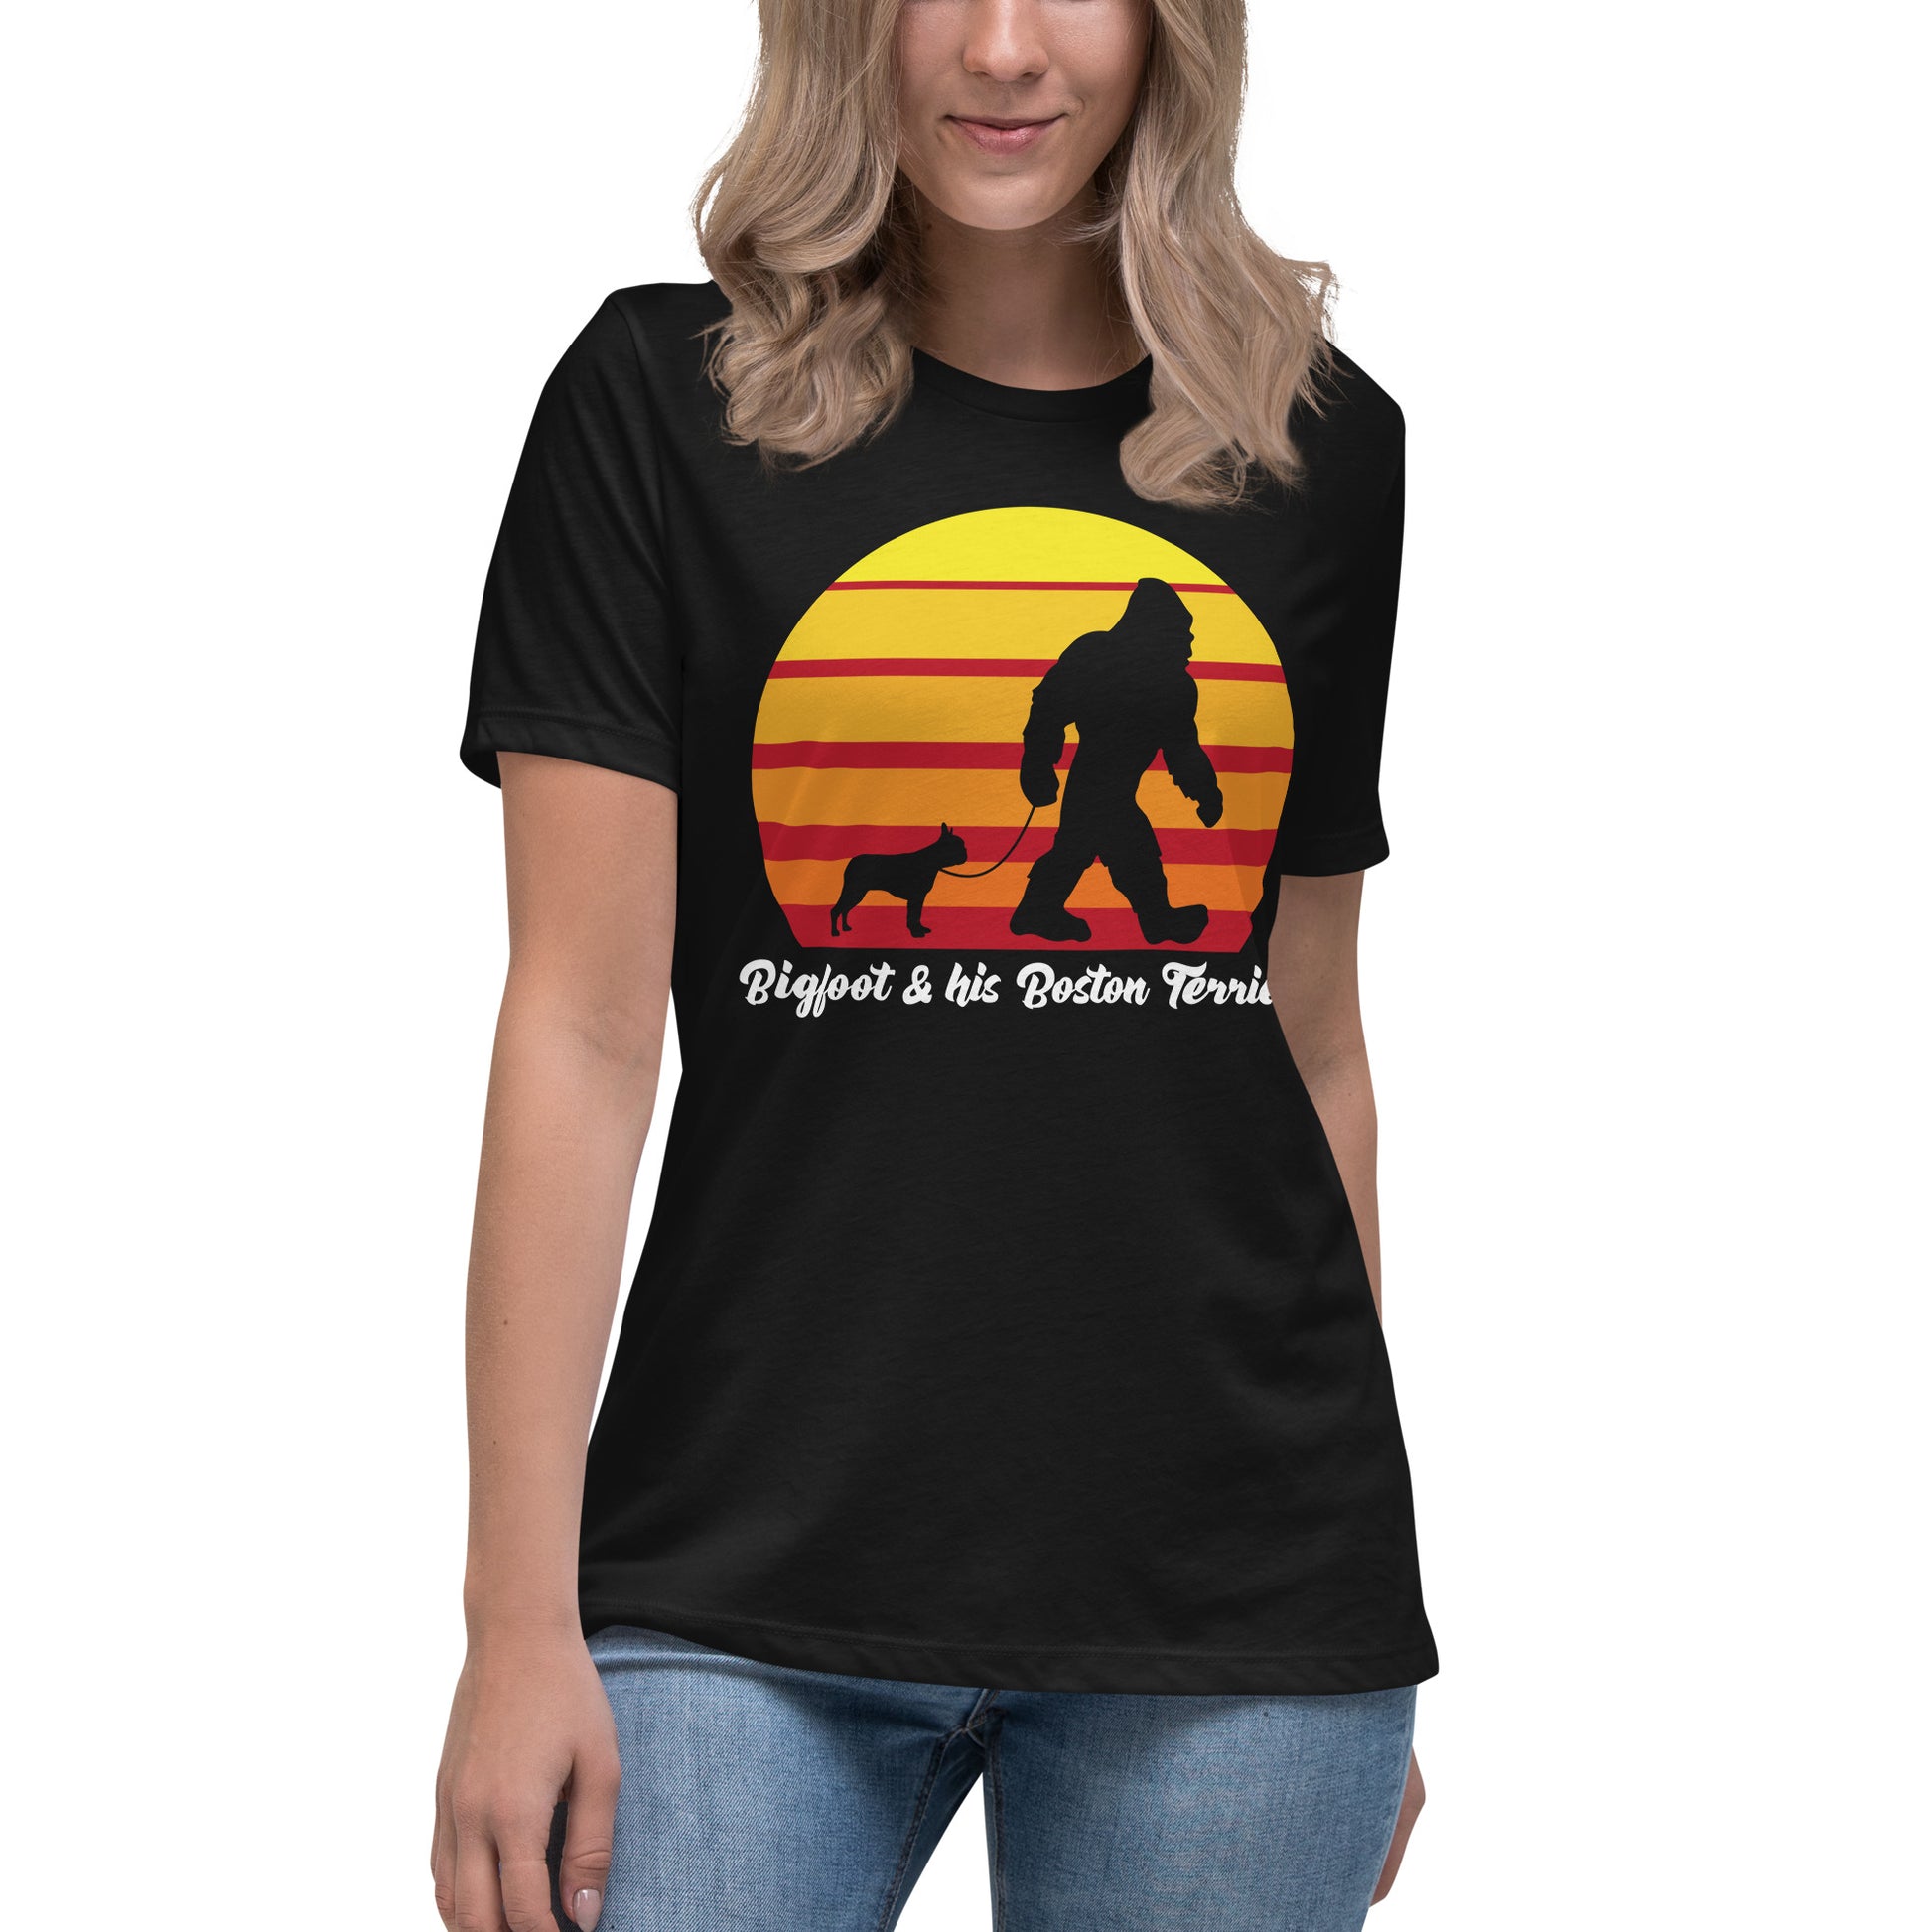 Big foot and his Boston Terrier women’s black t-shirt by Dog Artistry.